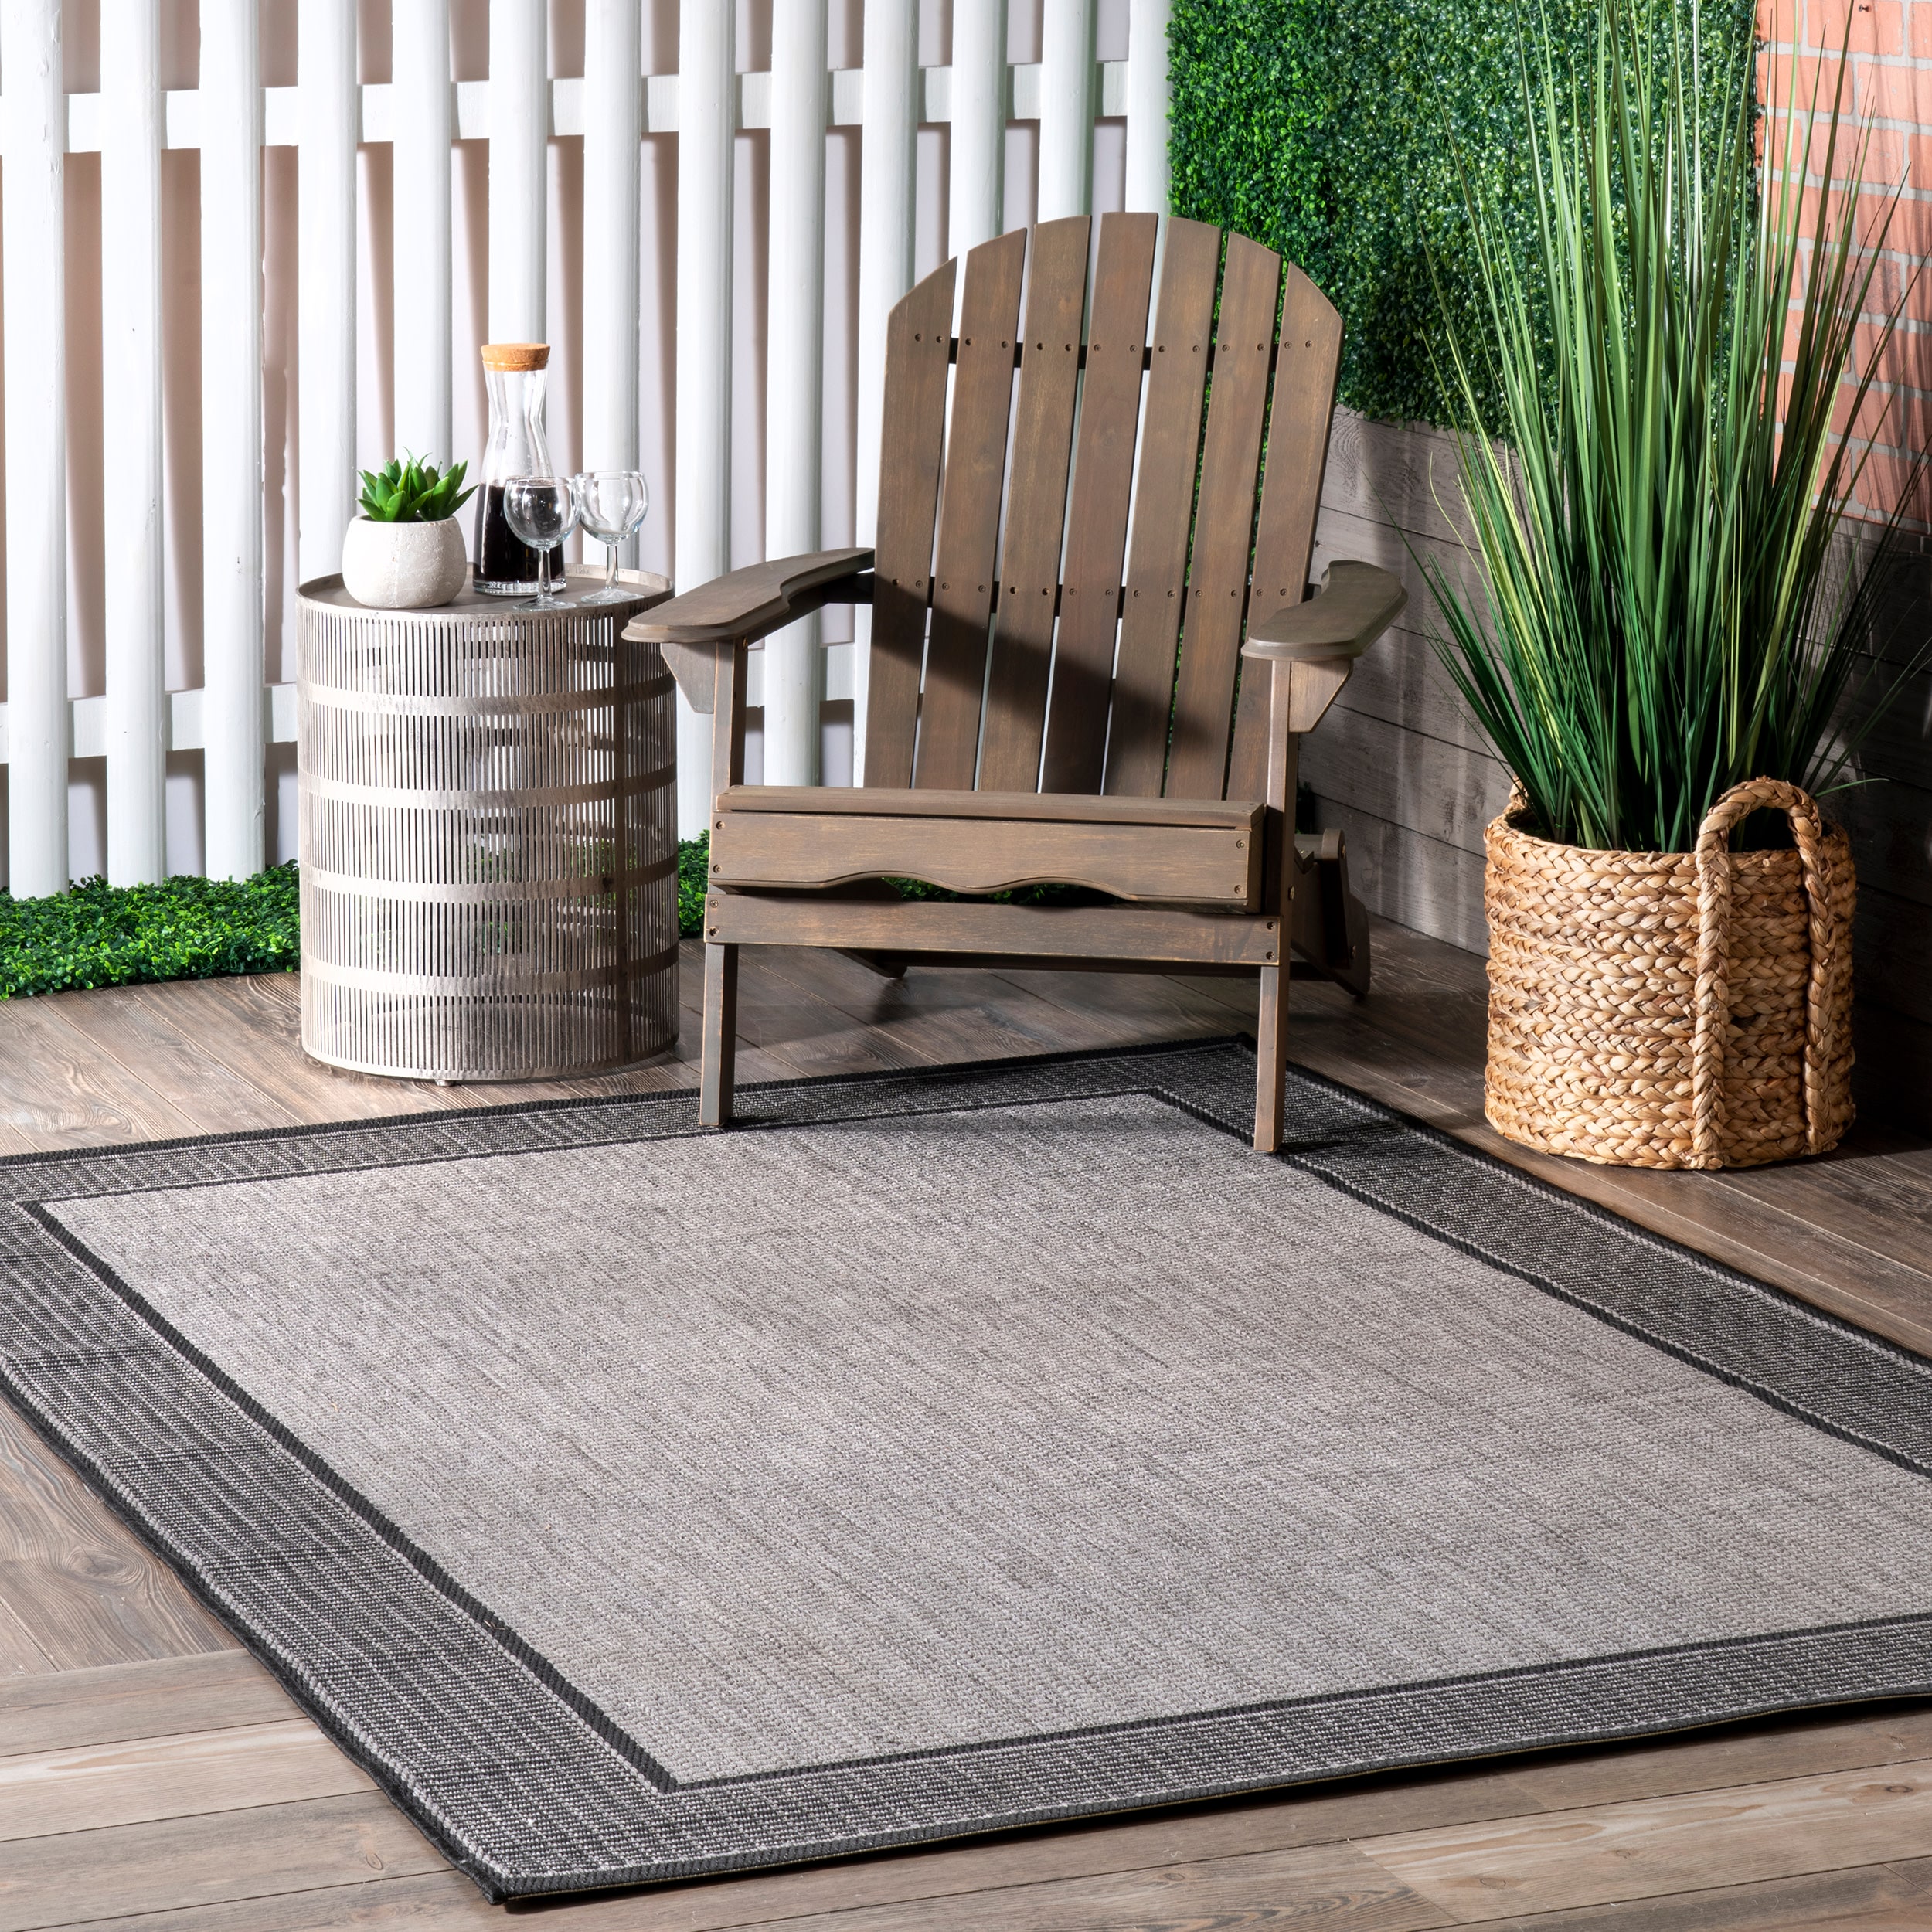 nuLOOM OWDN05A-71001010 7 ft. 10 in. x 10 ft. 10 in. Outdoor Gris Grey Machine Made Area Rug, Size: 0.25, Gray